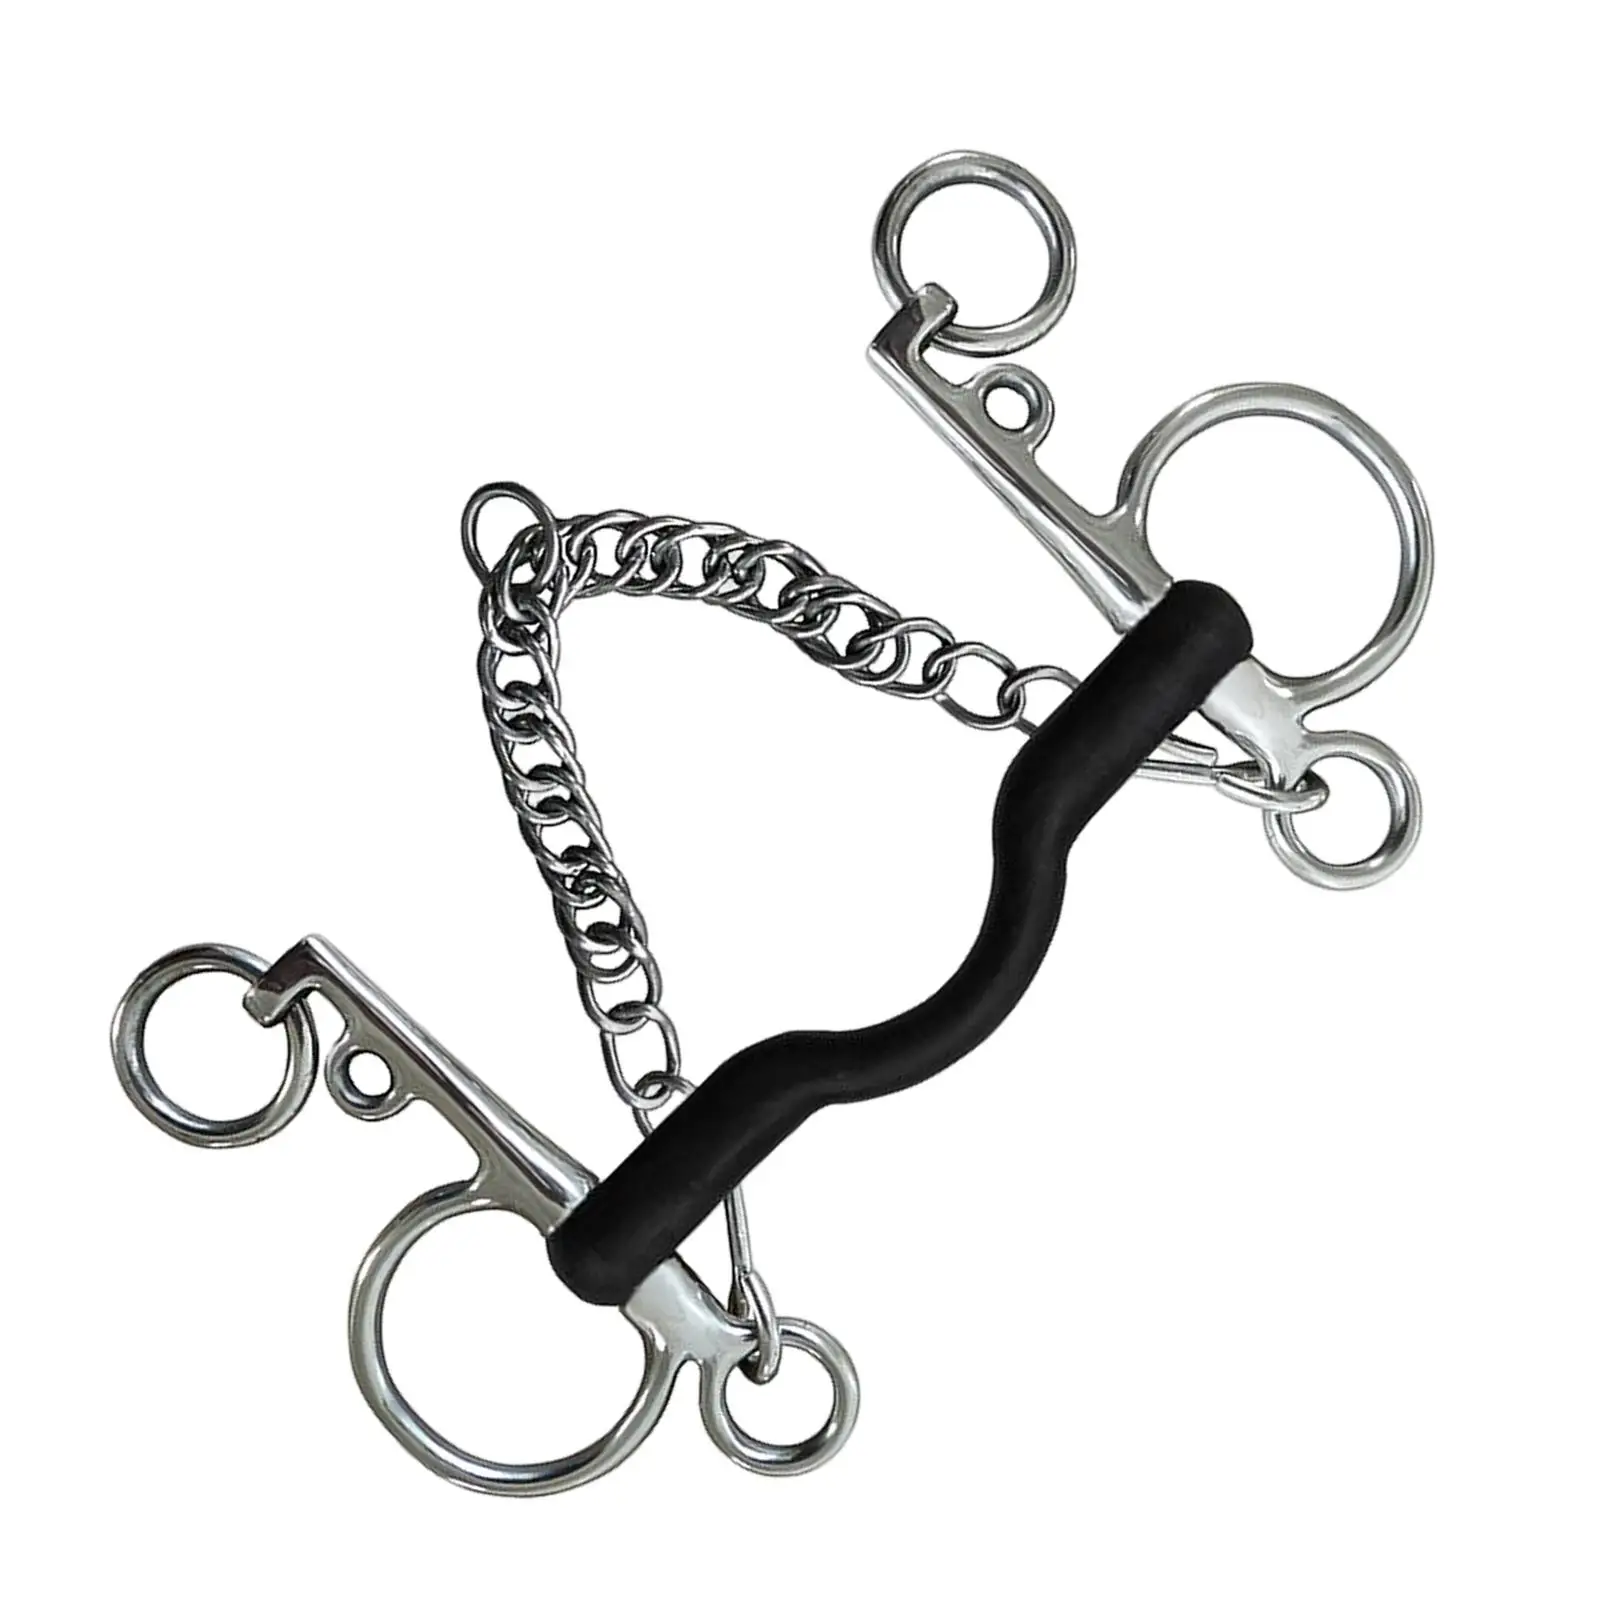 Horse Bit, with Fittings, Stainless Steel, Harness, for